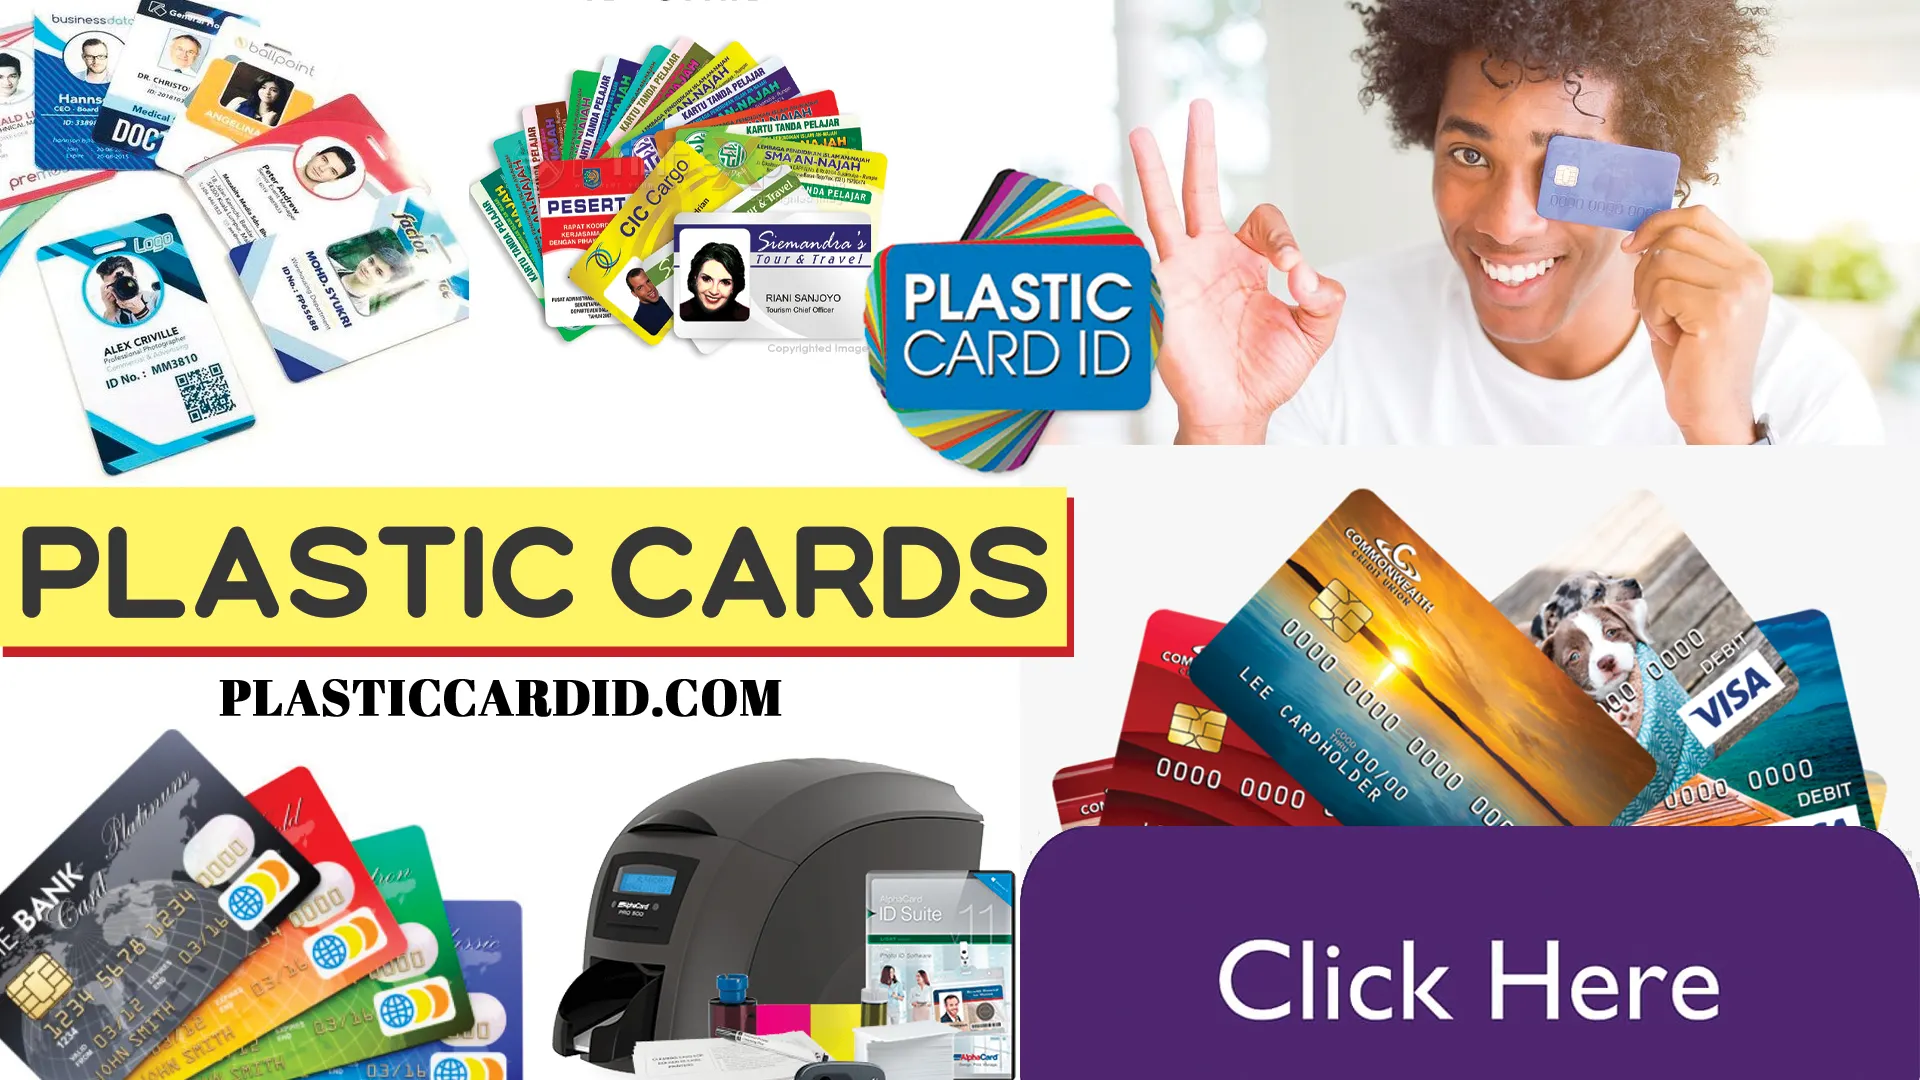 Create Your Signature Card with Plastic Card ID




